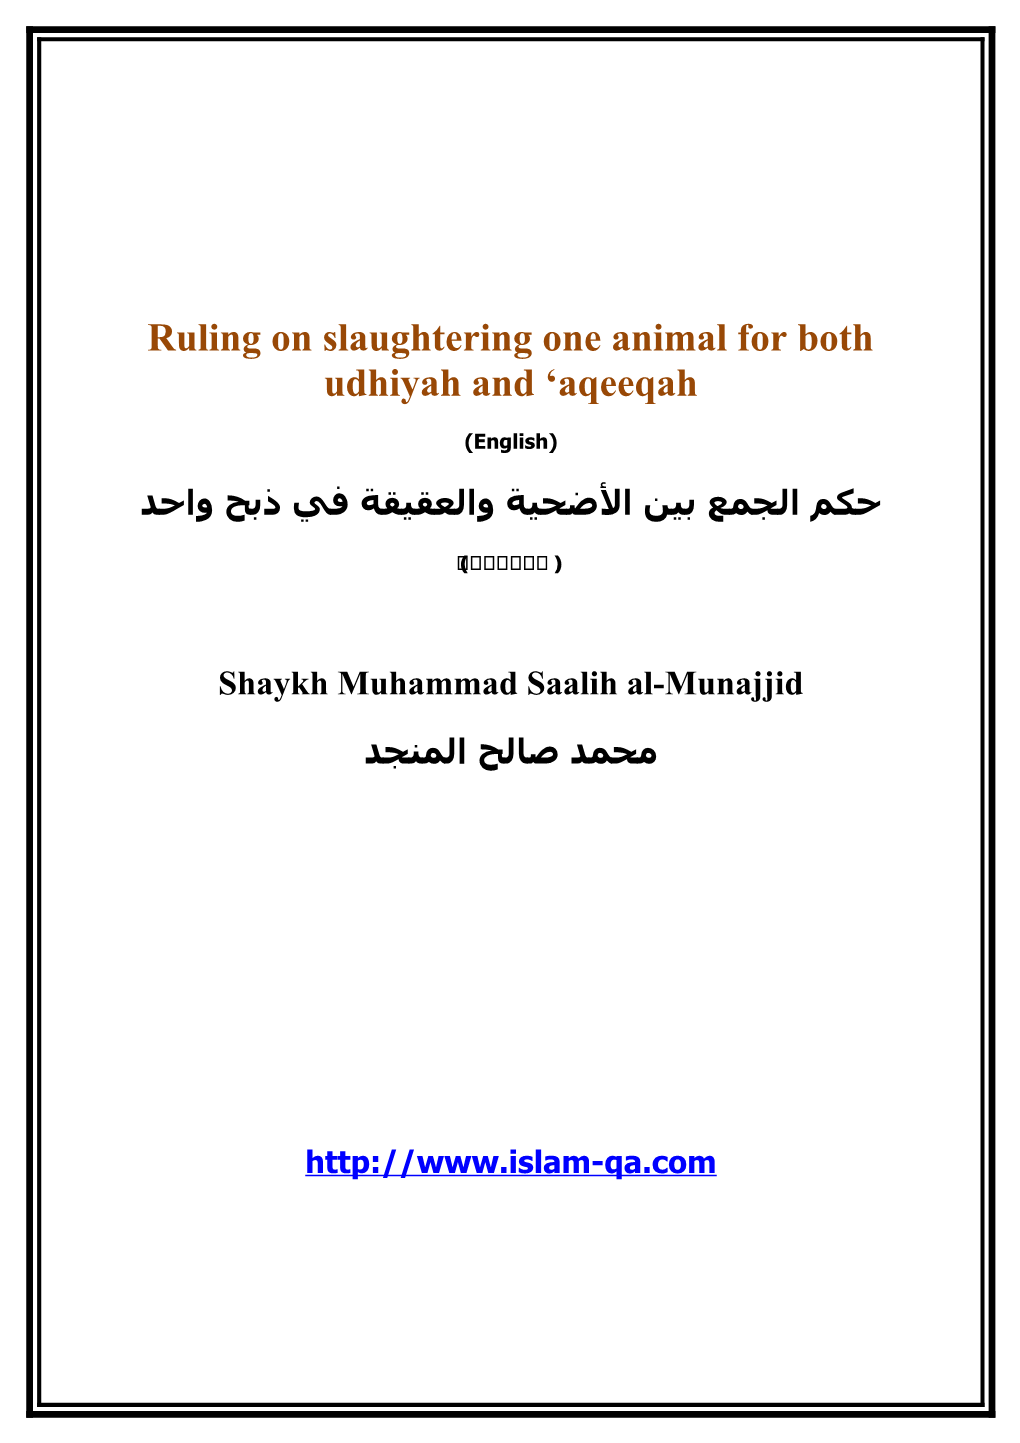 Ruling on Slaughtering One Animal for Both Udhiyah and Aqeeqah